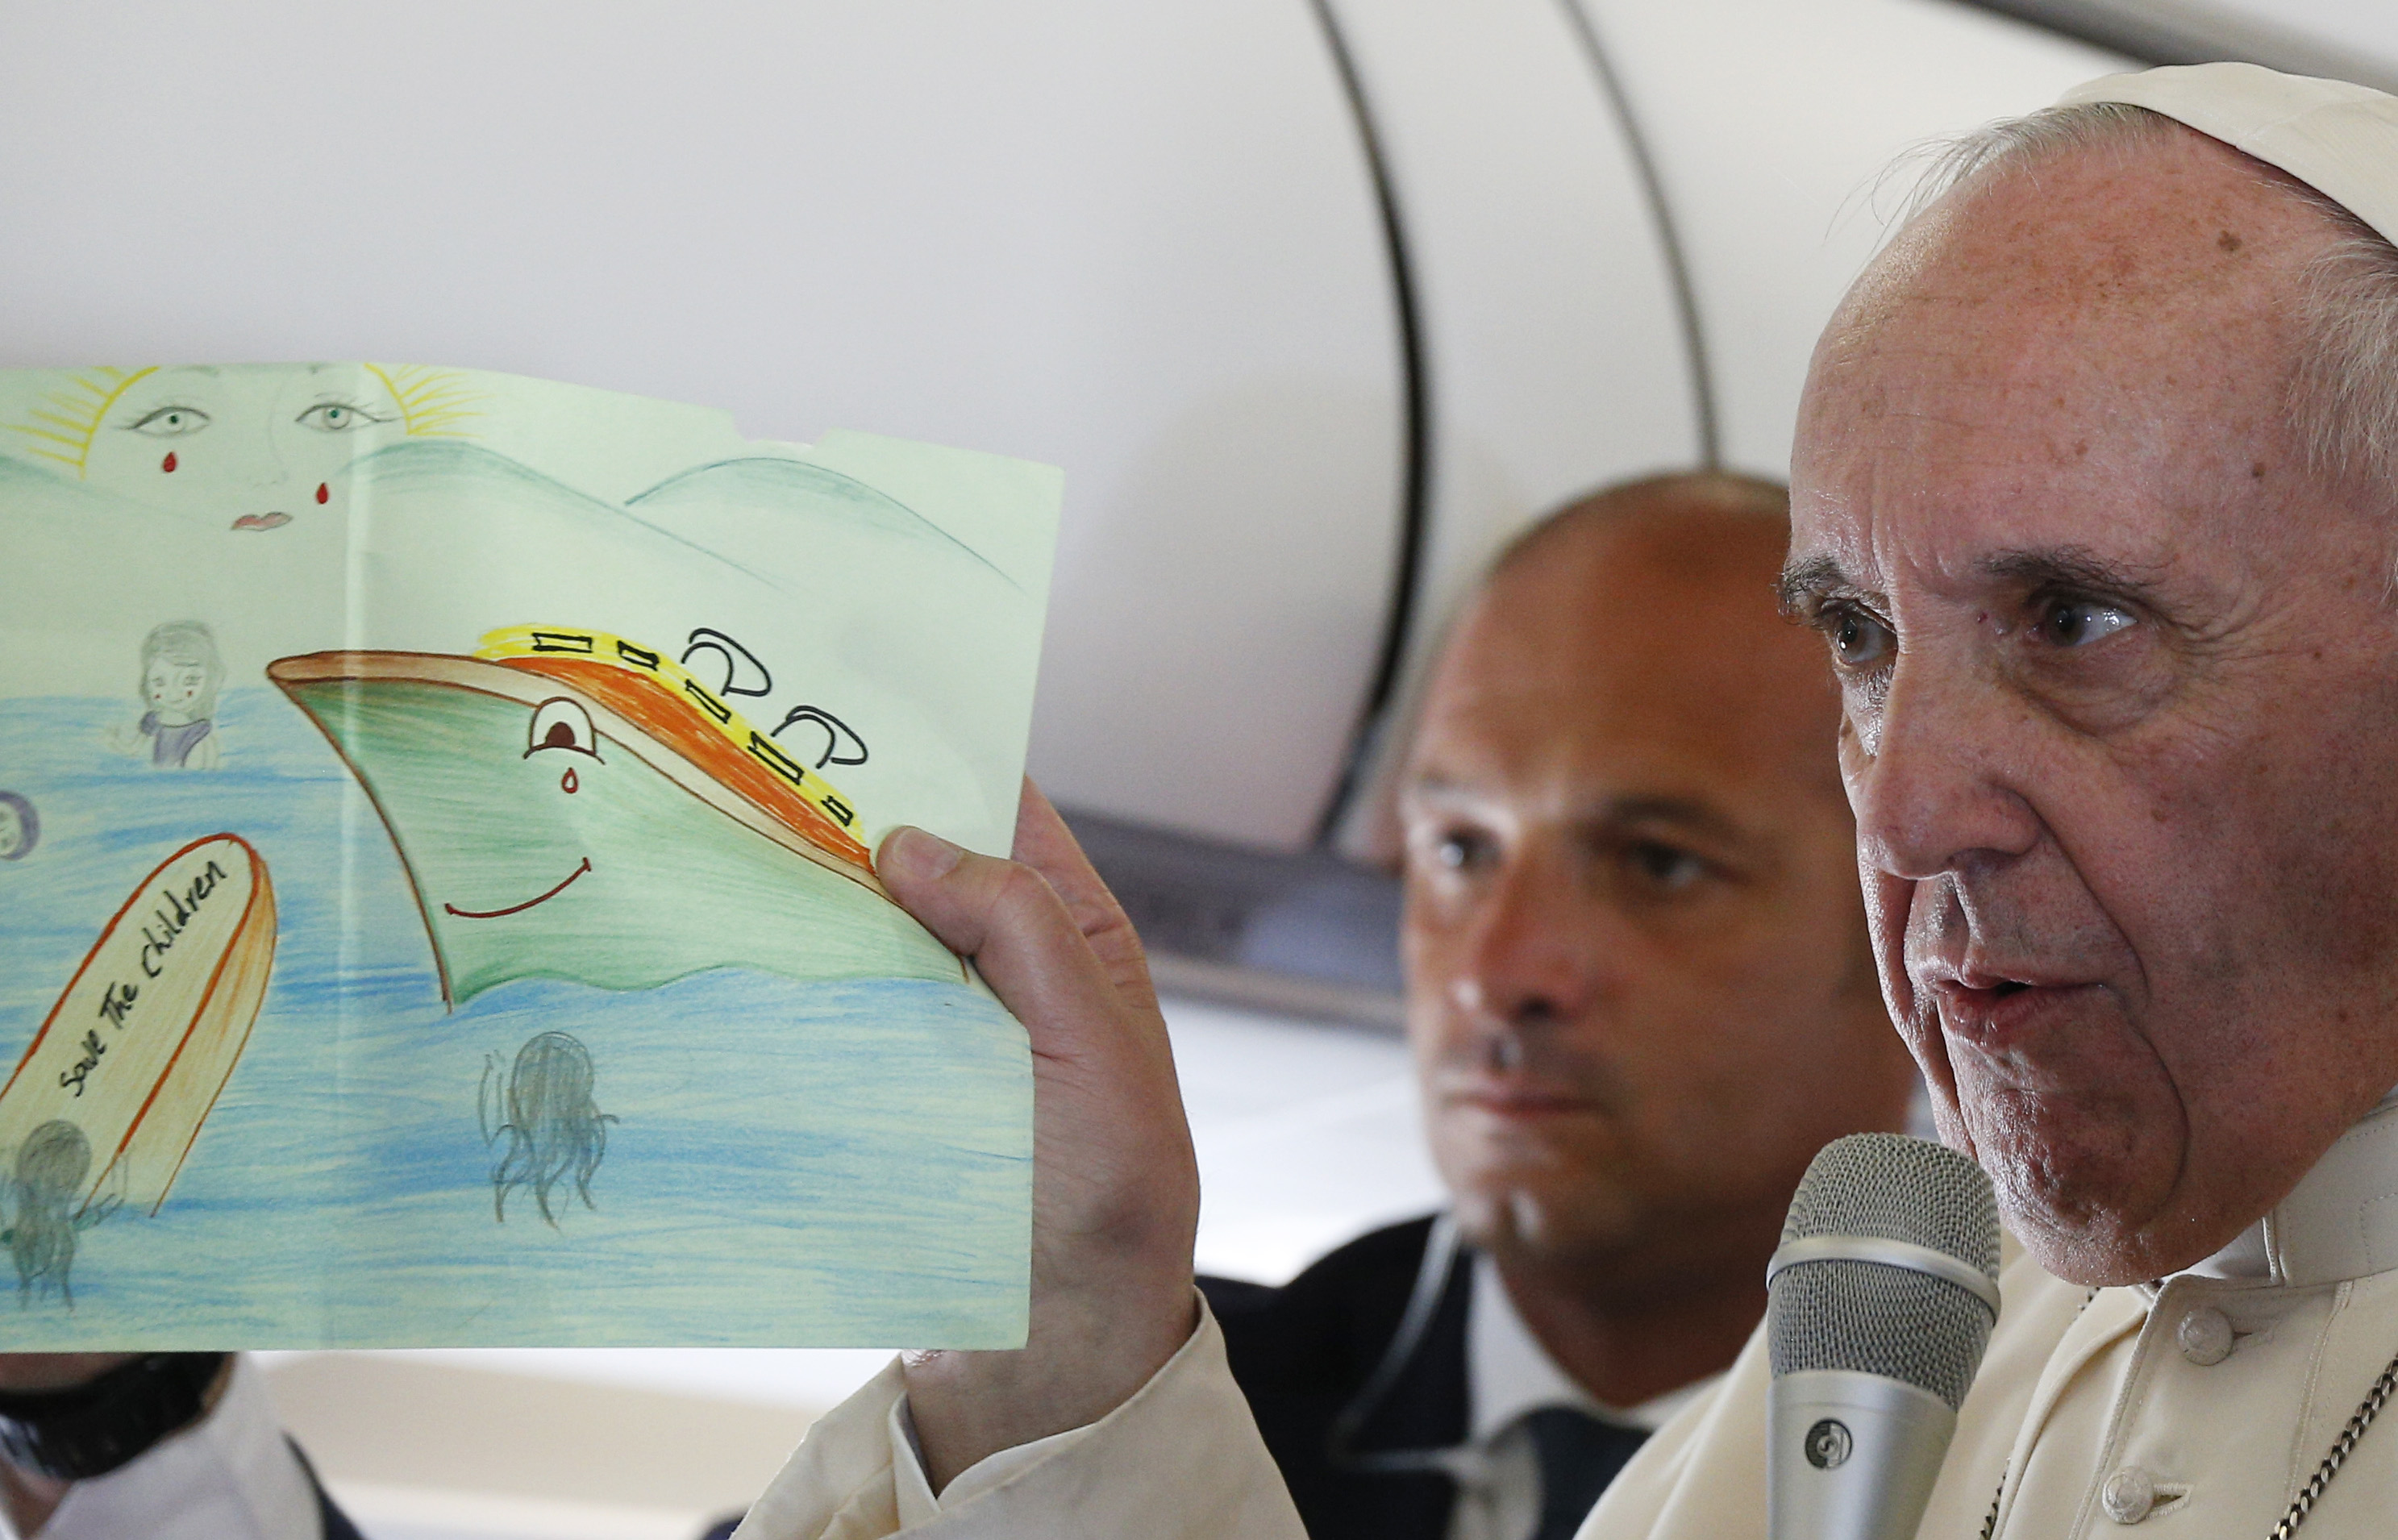 Pope Francis shows a drawing given by a child in a refugee camp as he answers questions from journalists aboard his April 16 flight from the Greek island of Lesbos to Rome. Journalists must not foment fear when covering issues or events such as forced migration due to war or famine, the pope said during a Sept. 22 audience with representatives of Italy's national association of journalists. (Paul Haring/CNS)